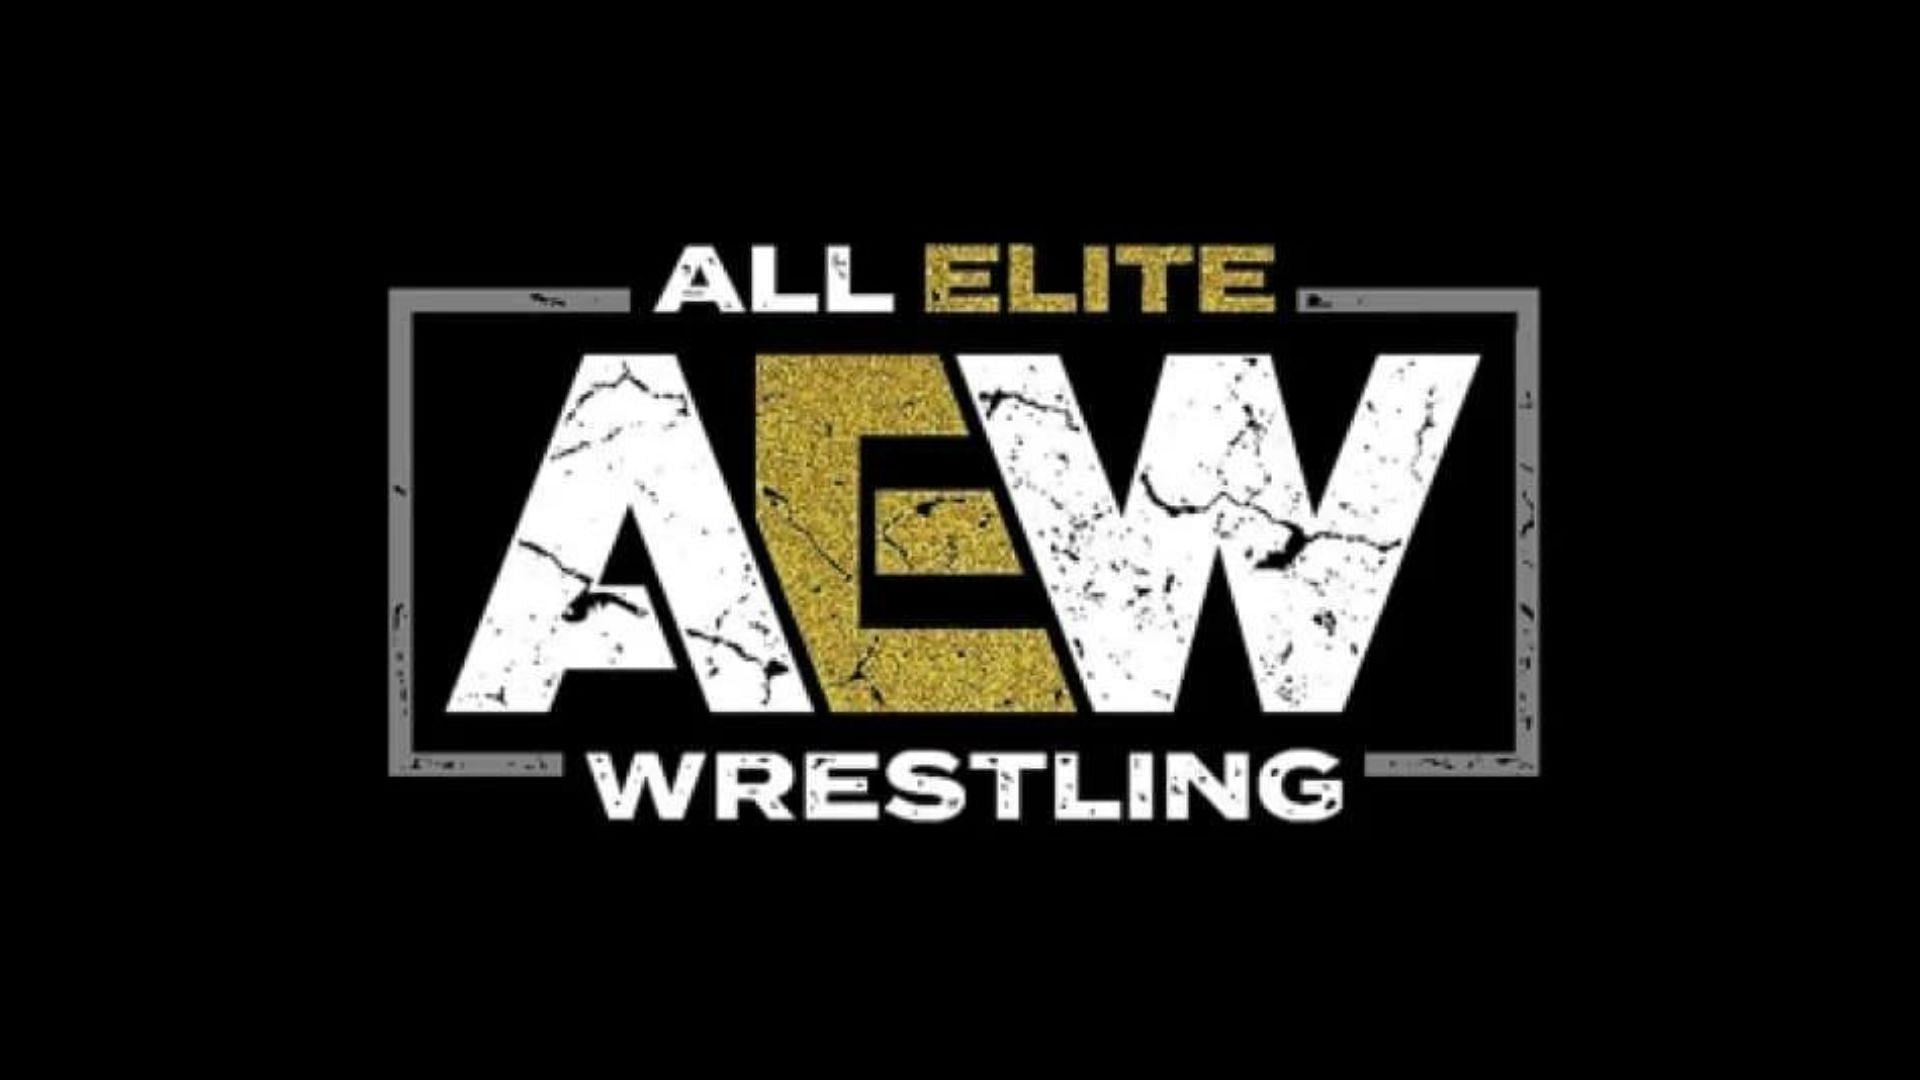 Find out which AEW star was recently released from the promotion?